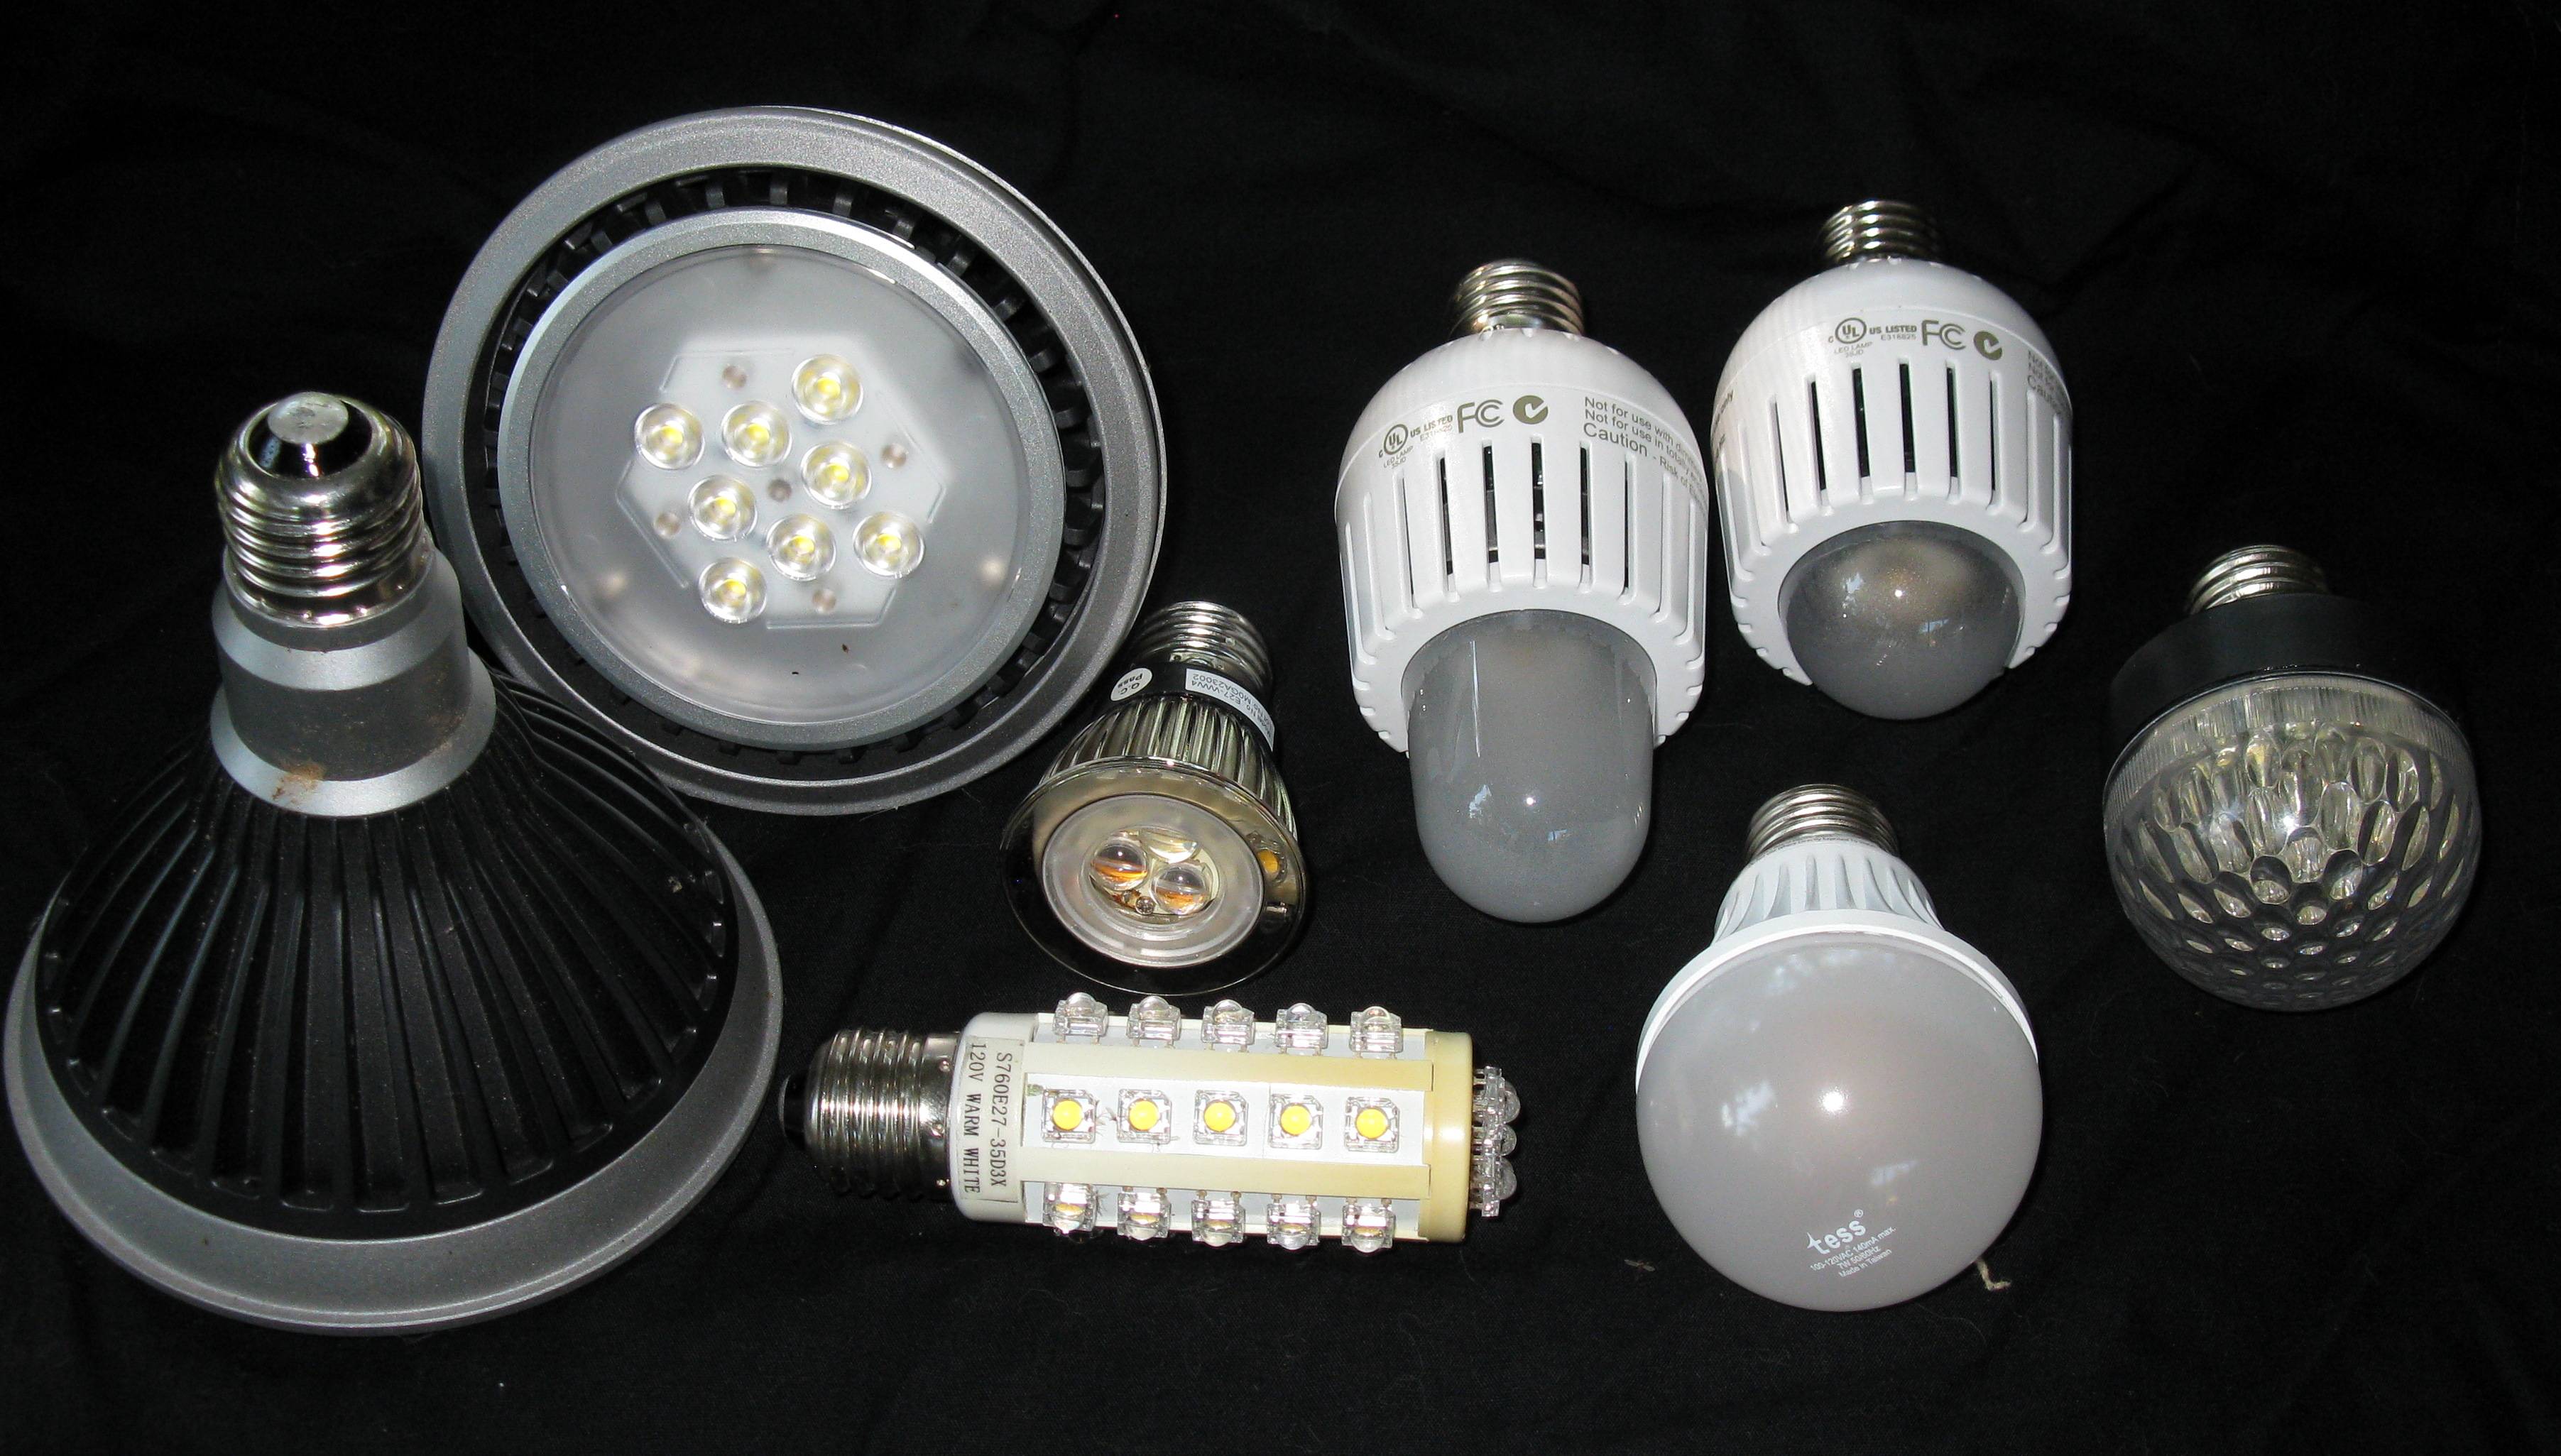 About LED- Part Two